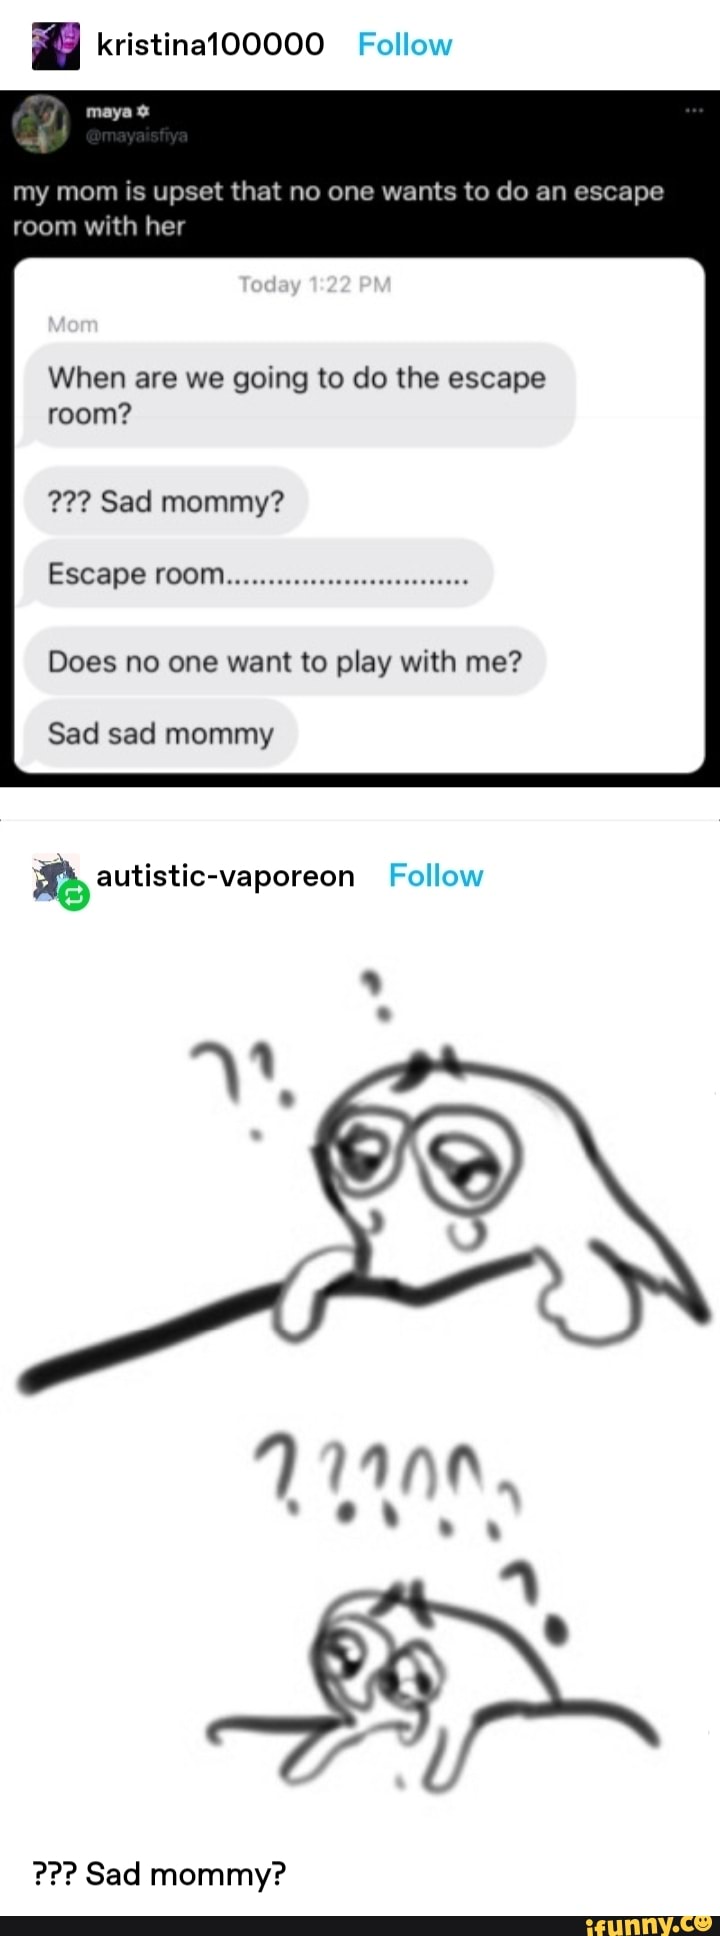 Mommy Wants to Play!